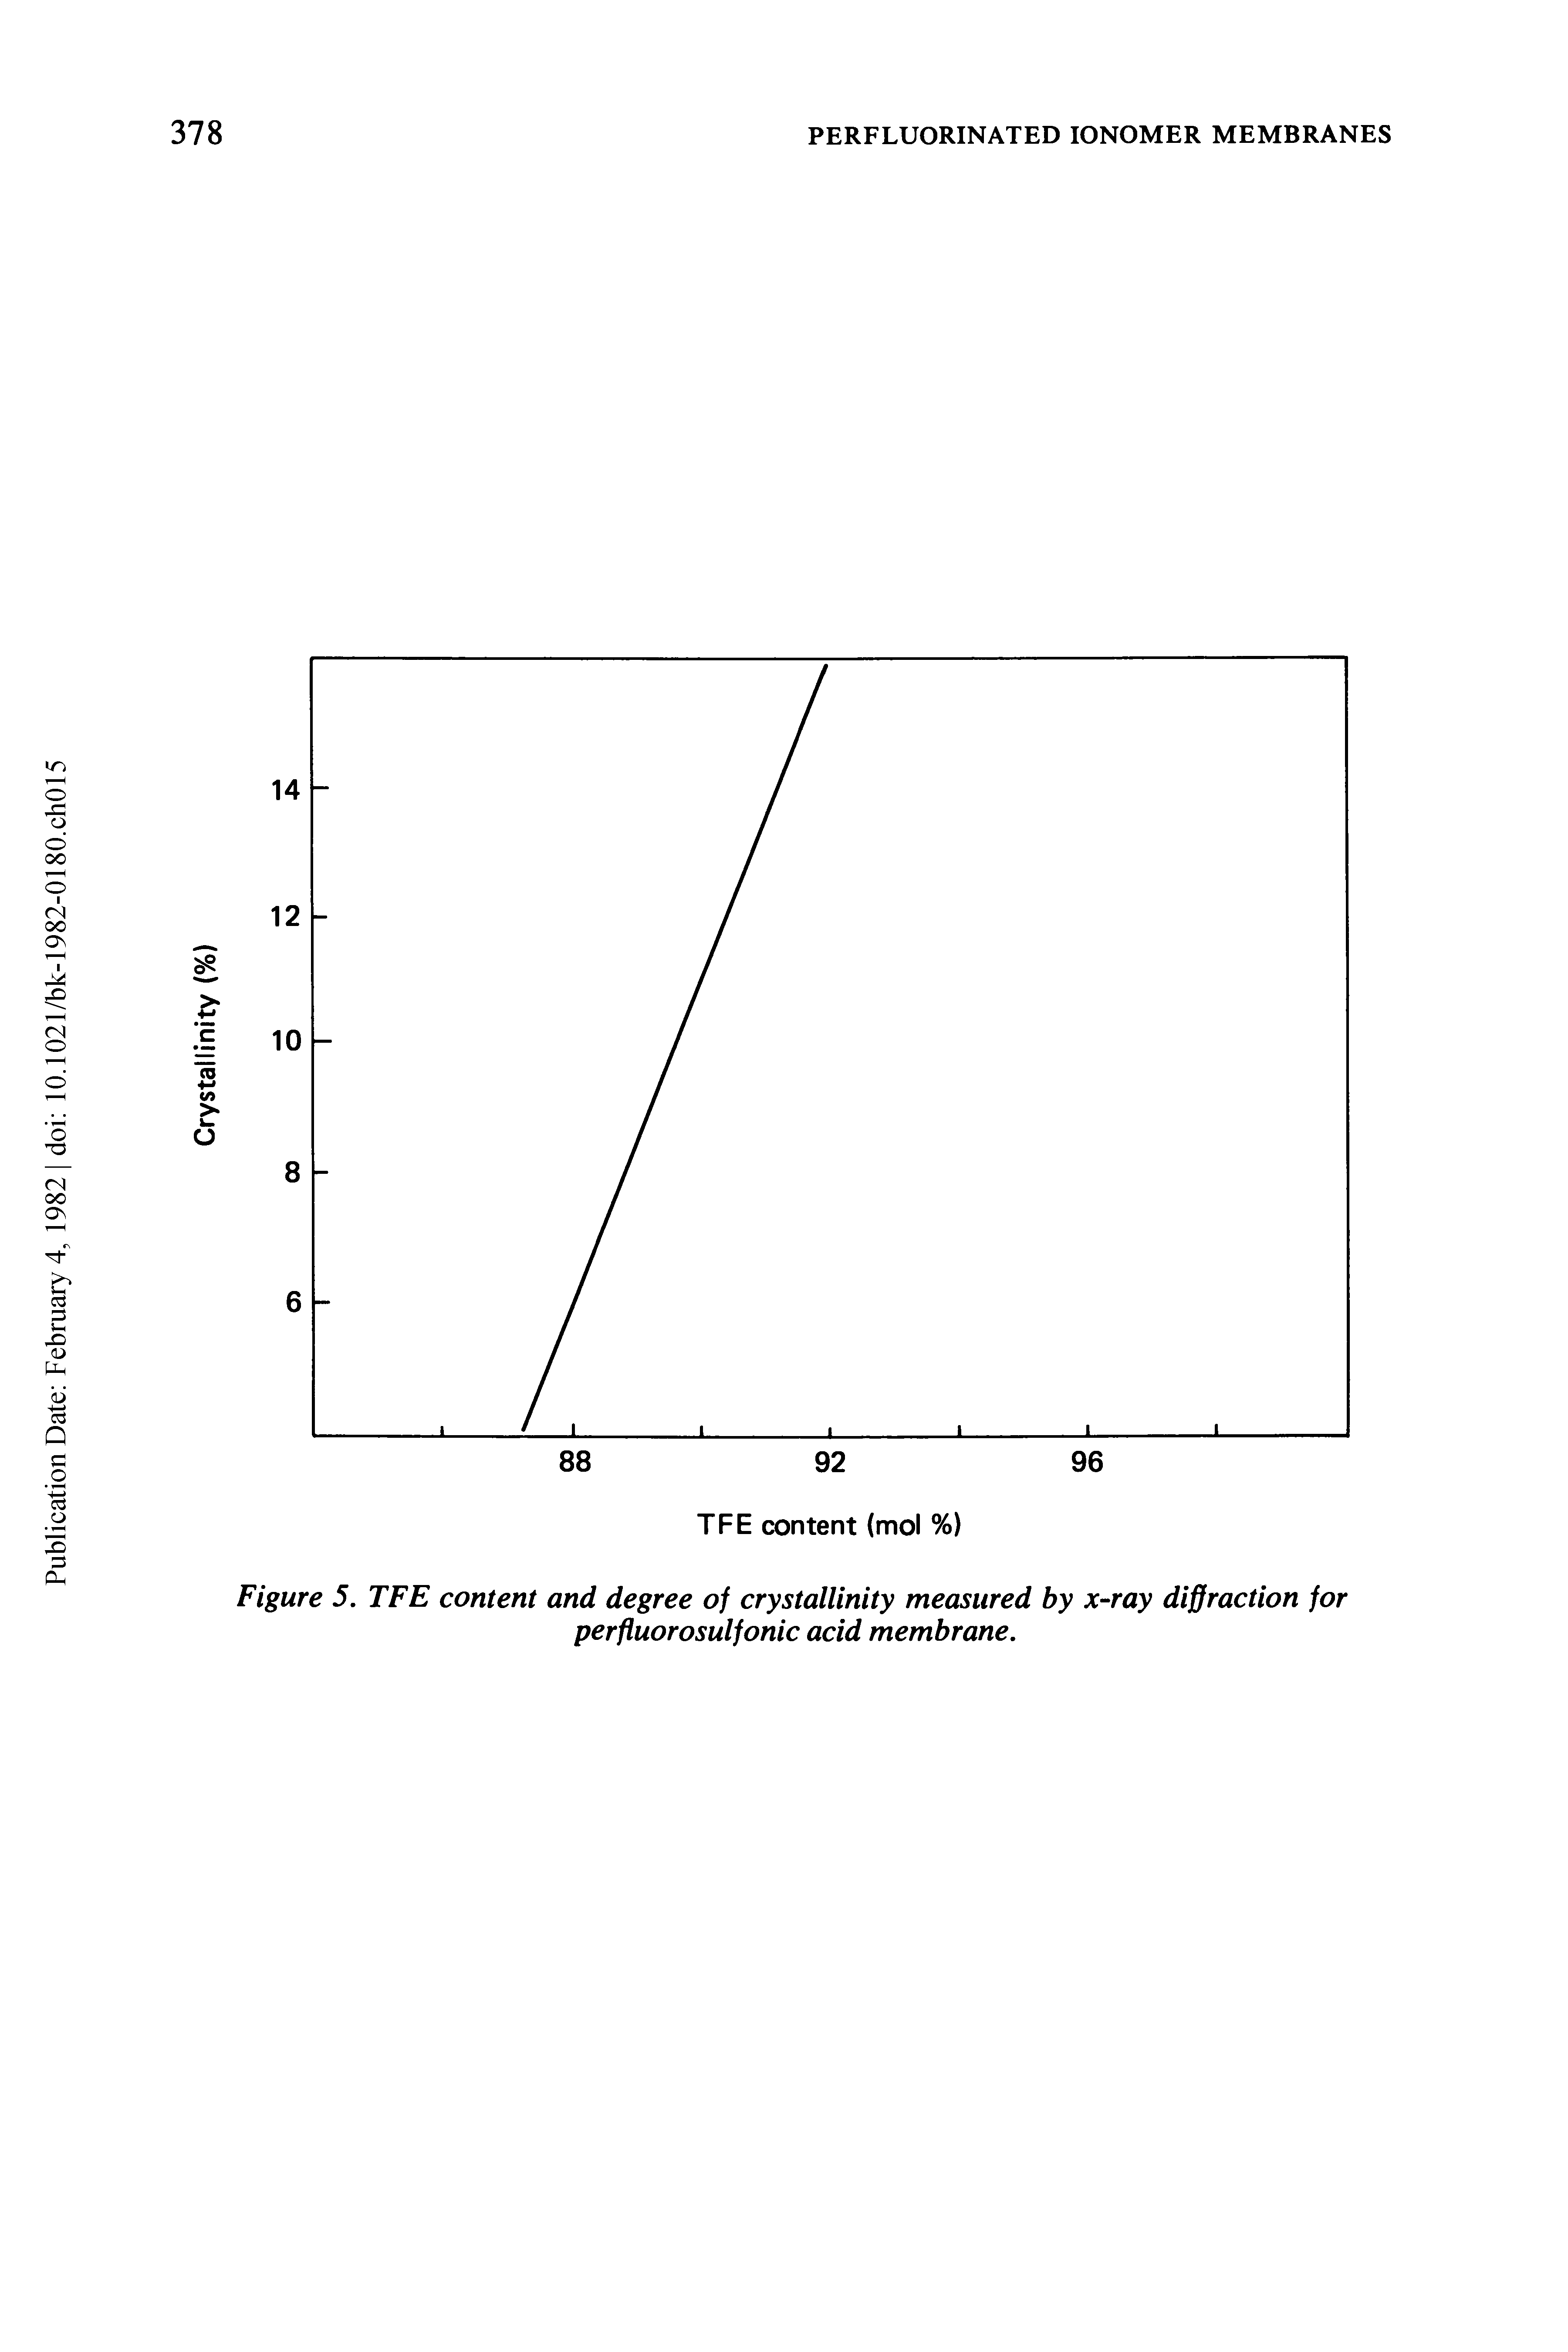 Figure 5. TFE content and degree of crystallinity measured by x-ray diffraction for perfluorosulfonic acid membrane.